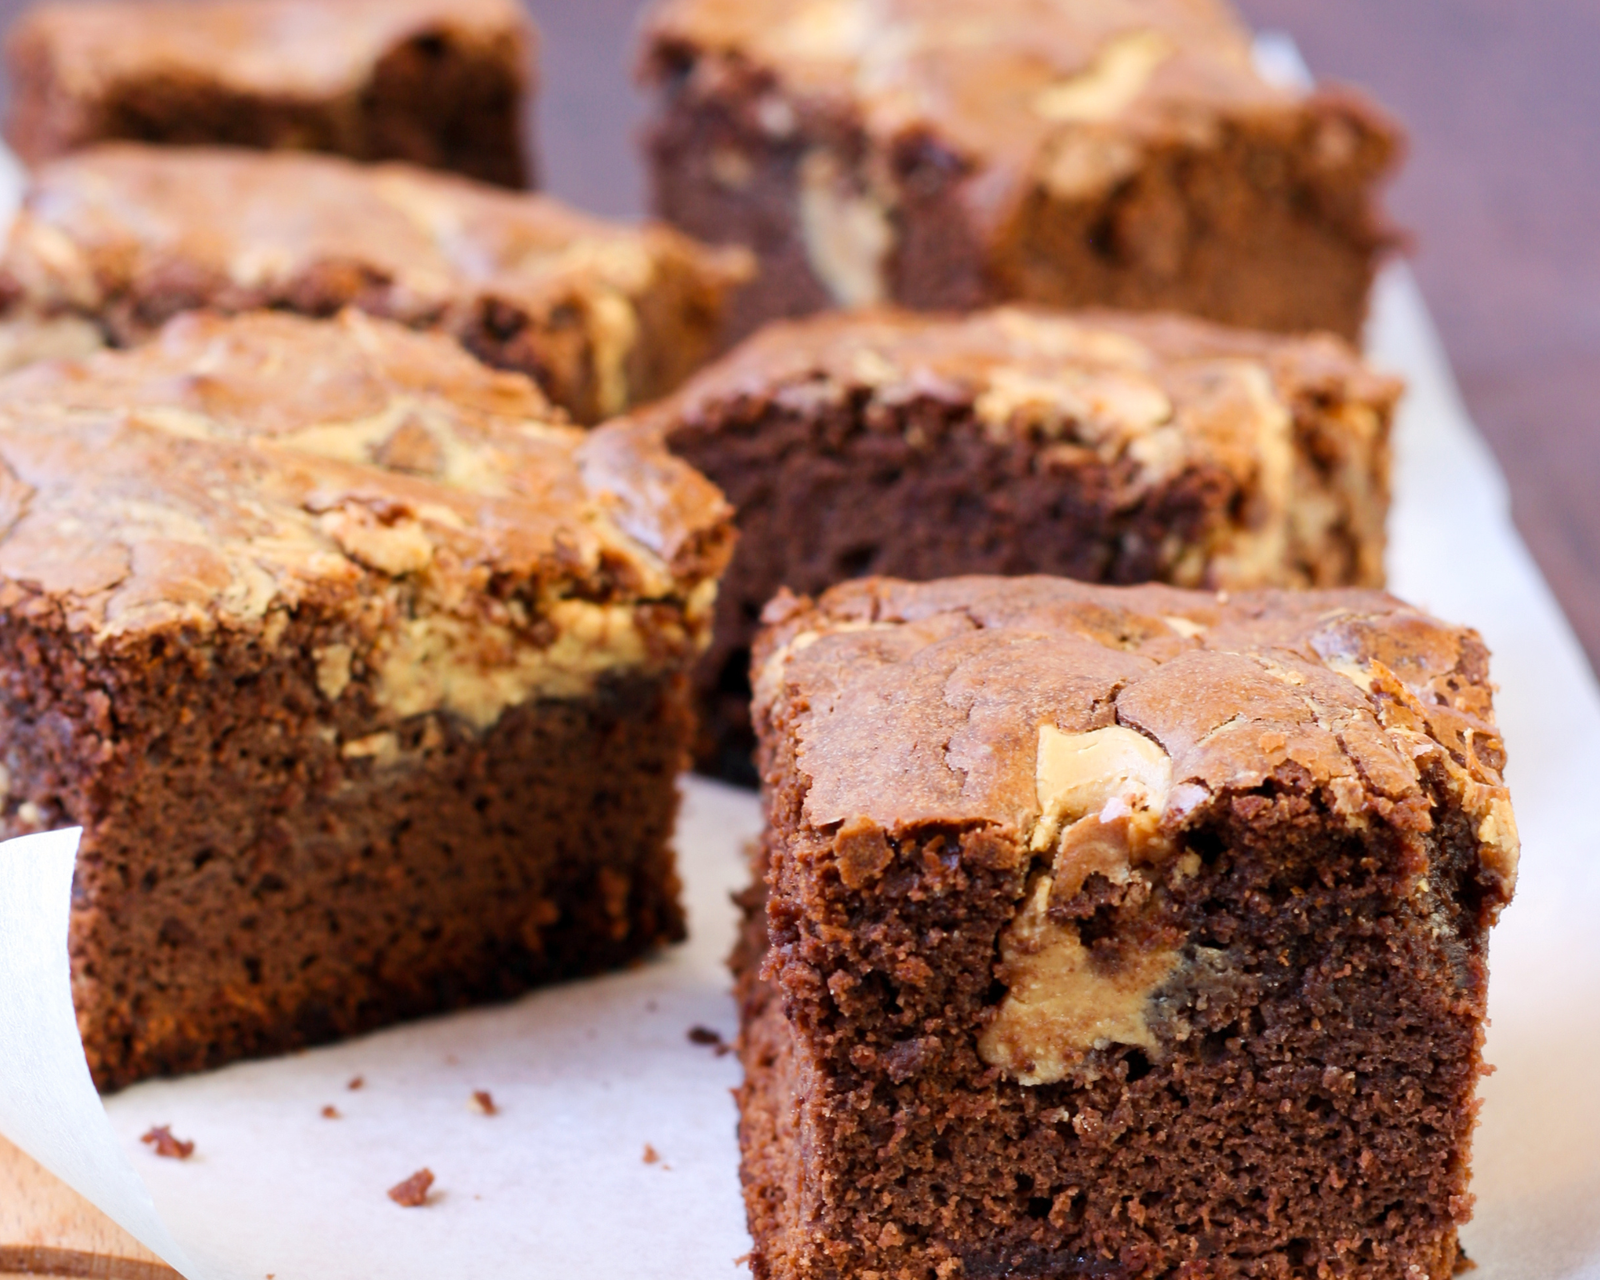 Awesome Peanut Butter Chocolate Brownies Recipe